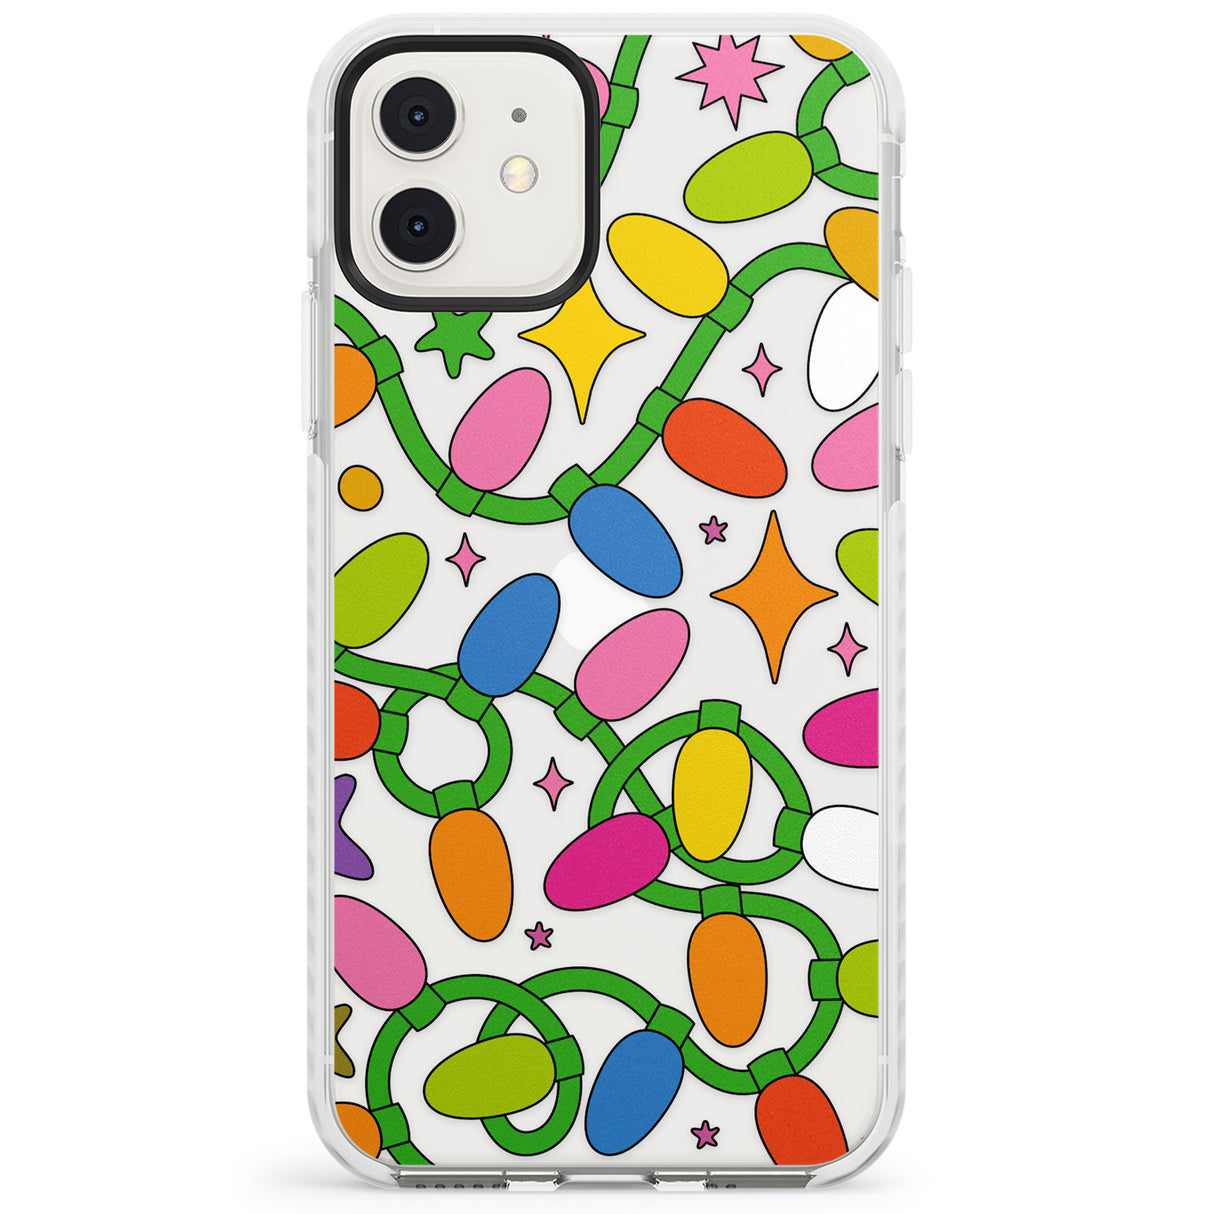 Festive Lights Pattern Impact Phone Case for iPhone 11, iphone 12